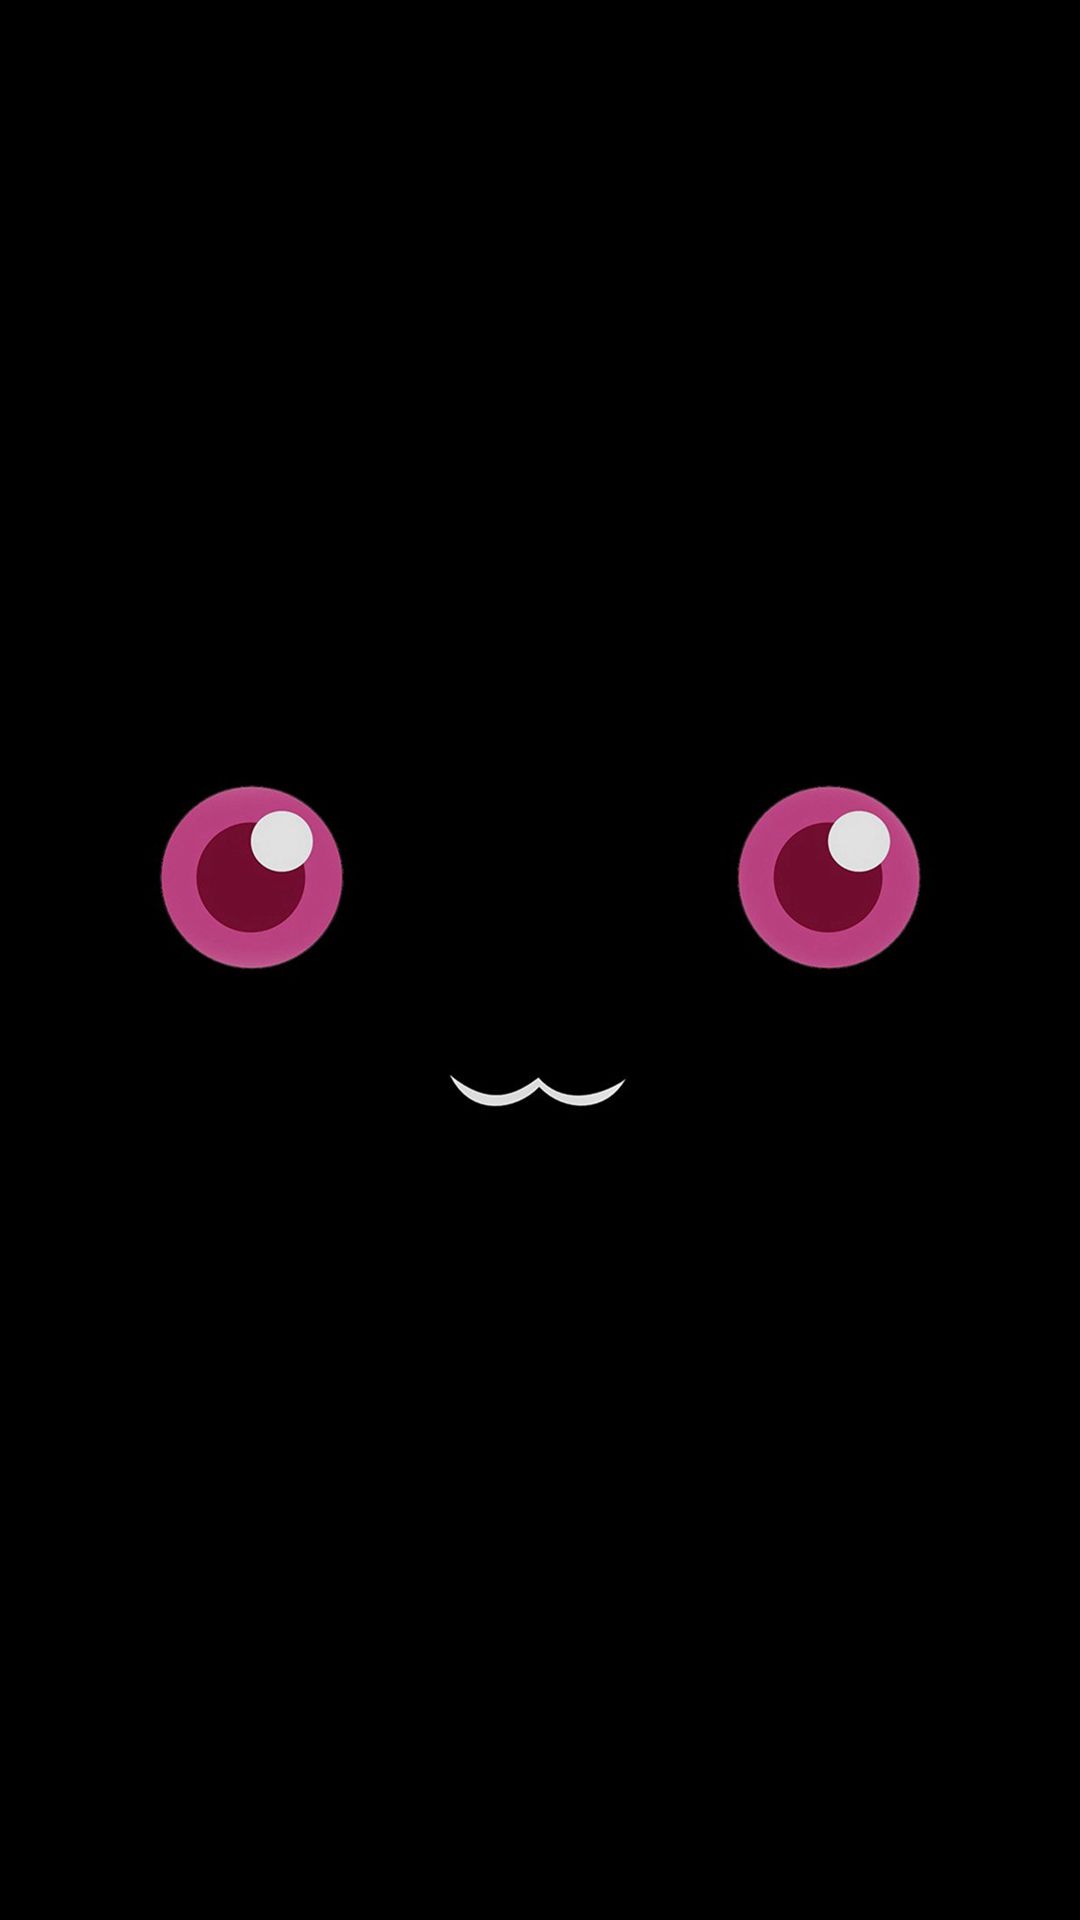 A black background with pink eyes - Black anime